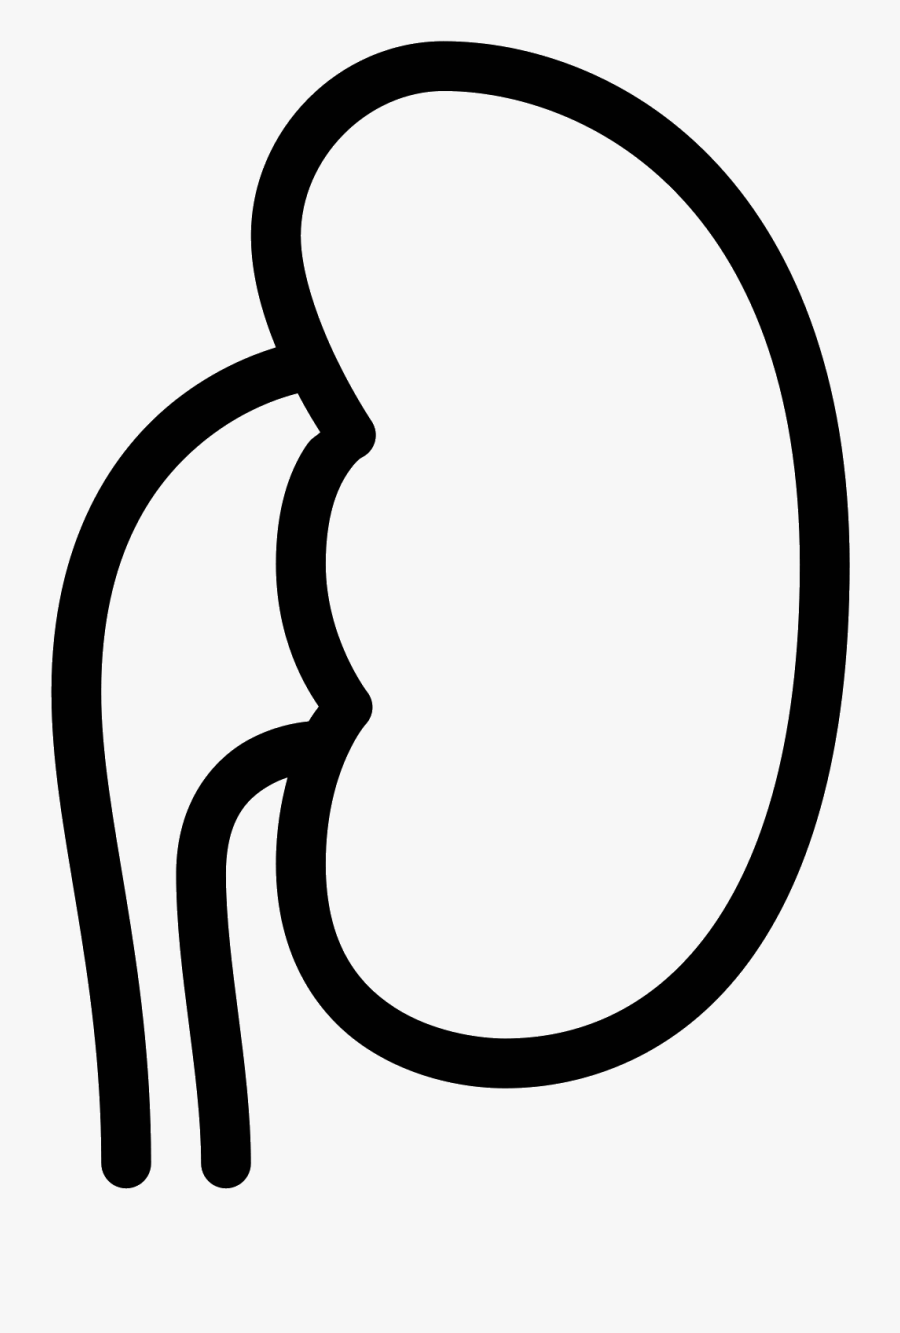 Kidney Clipart Human Kidney - Icono Riñon Png, Transparent Clipart